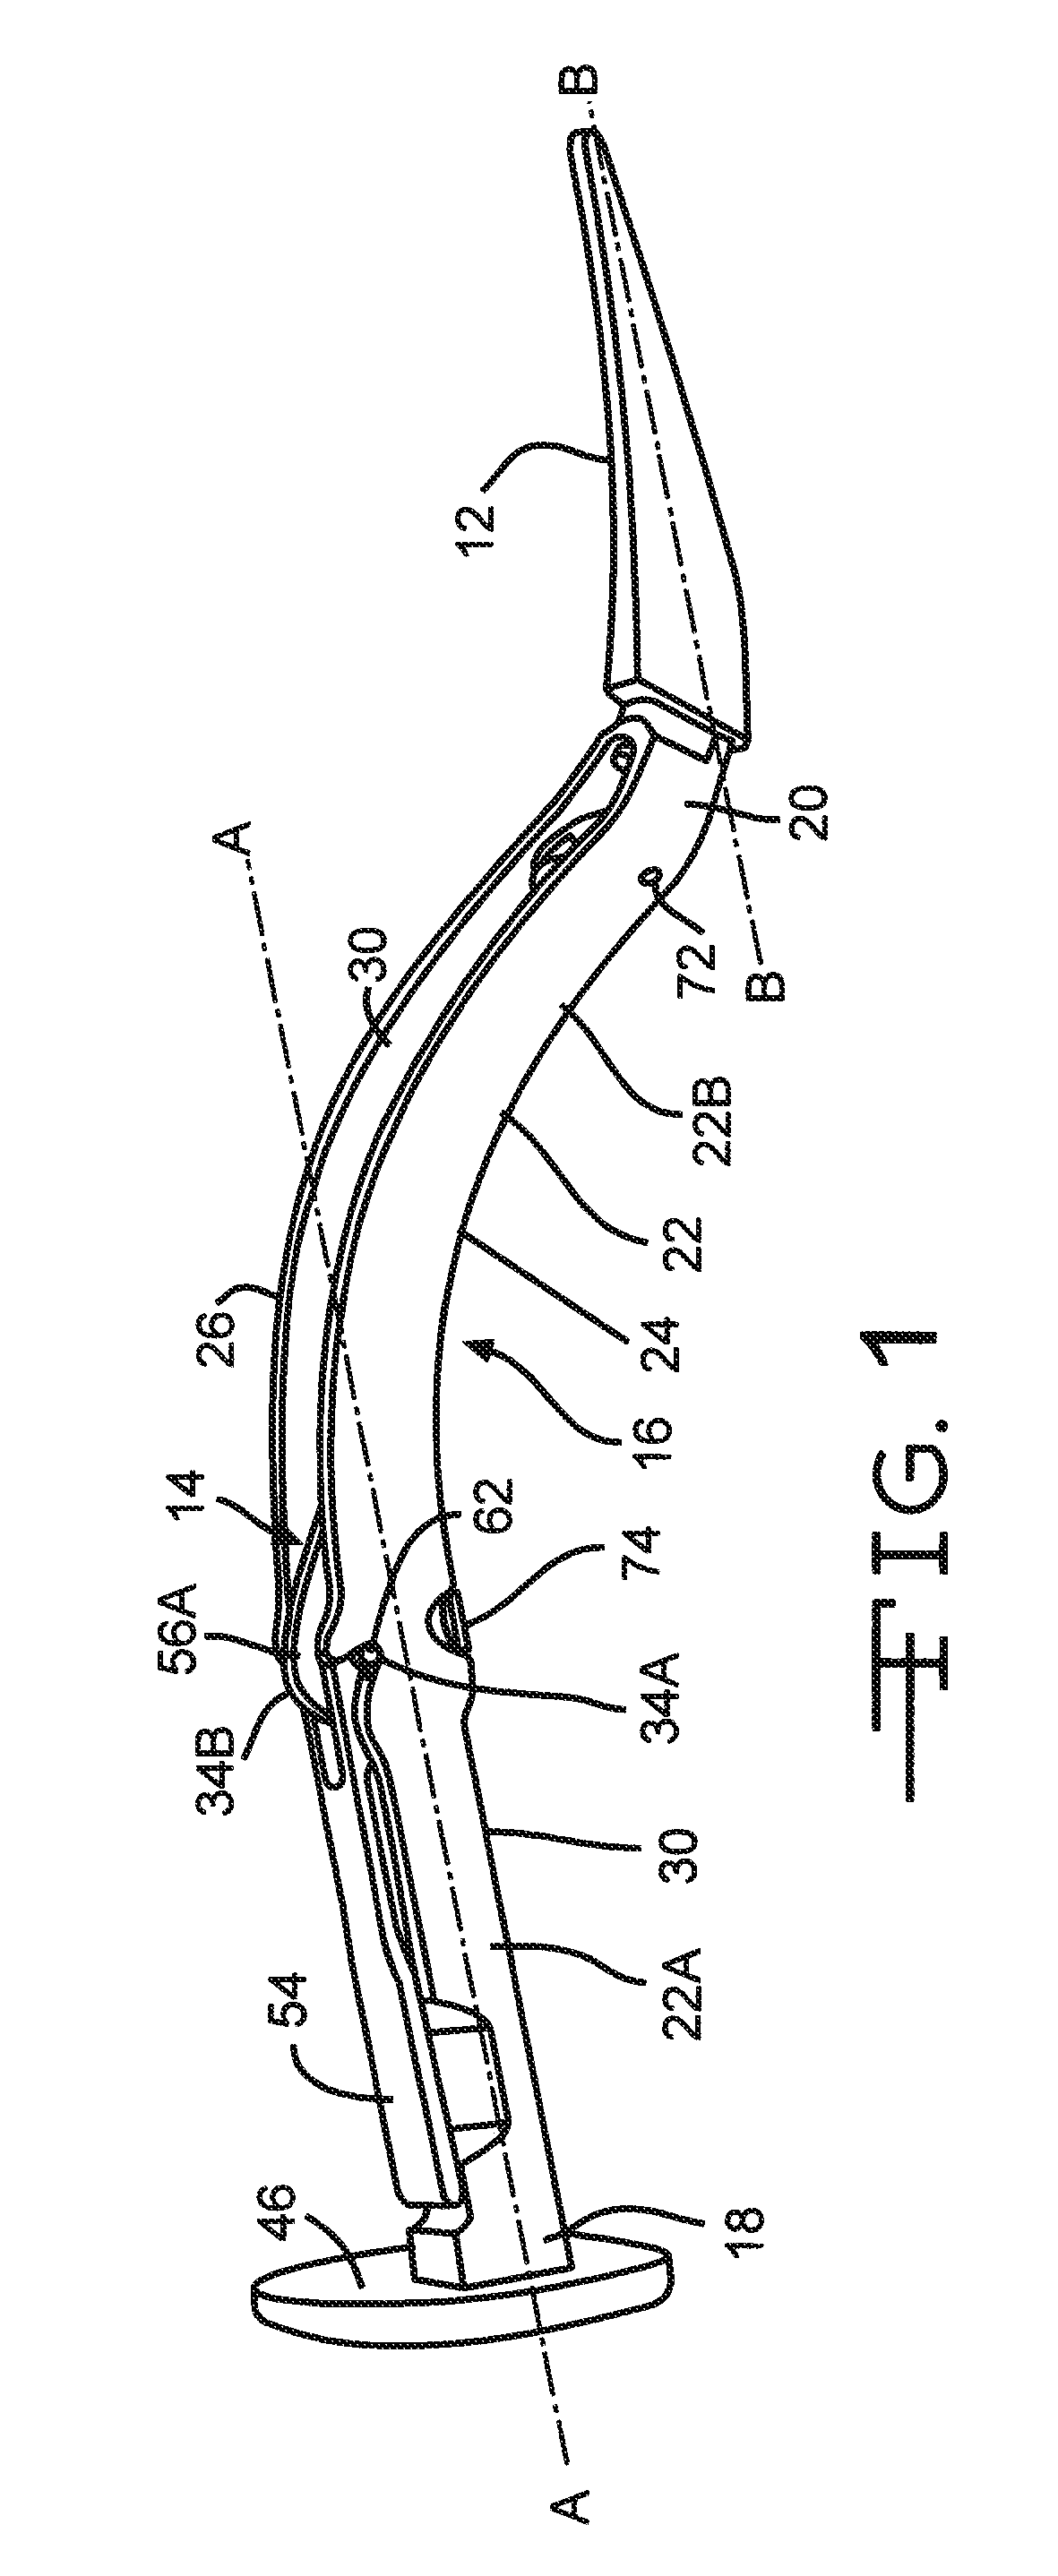 Double offset surgical tool handle assembly having a locking linkage aligned along two different planes